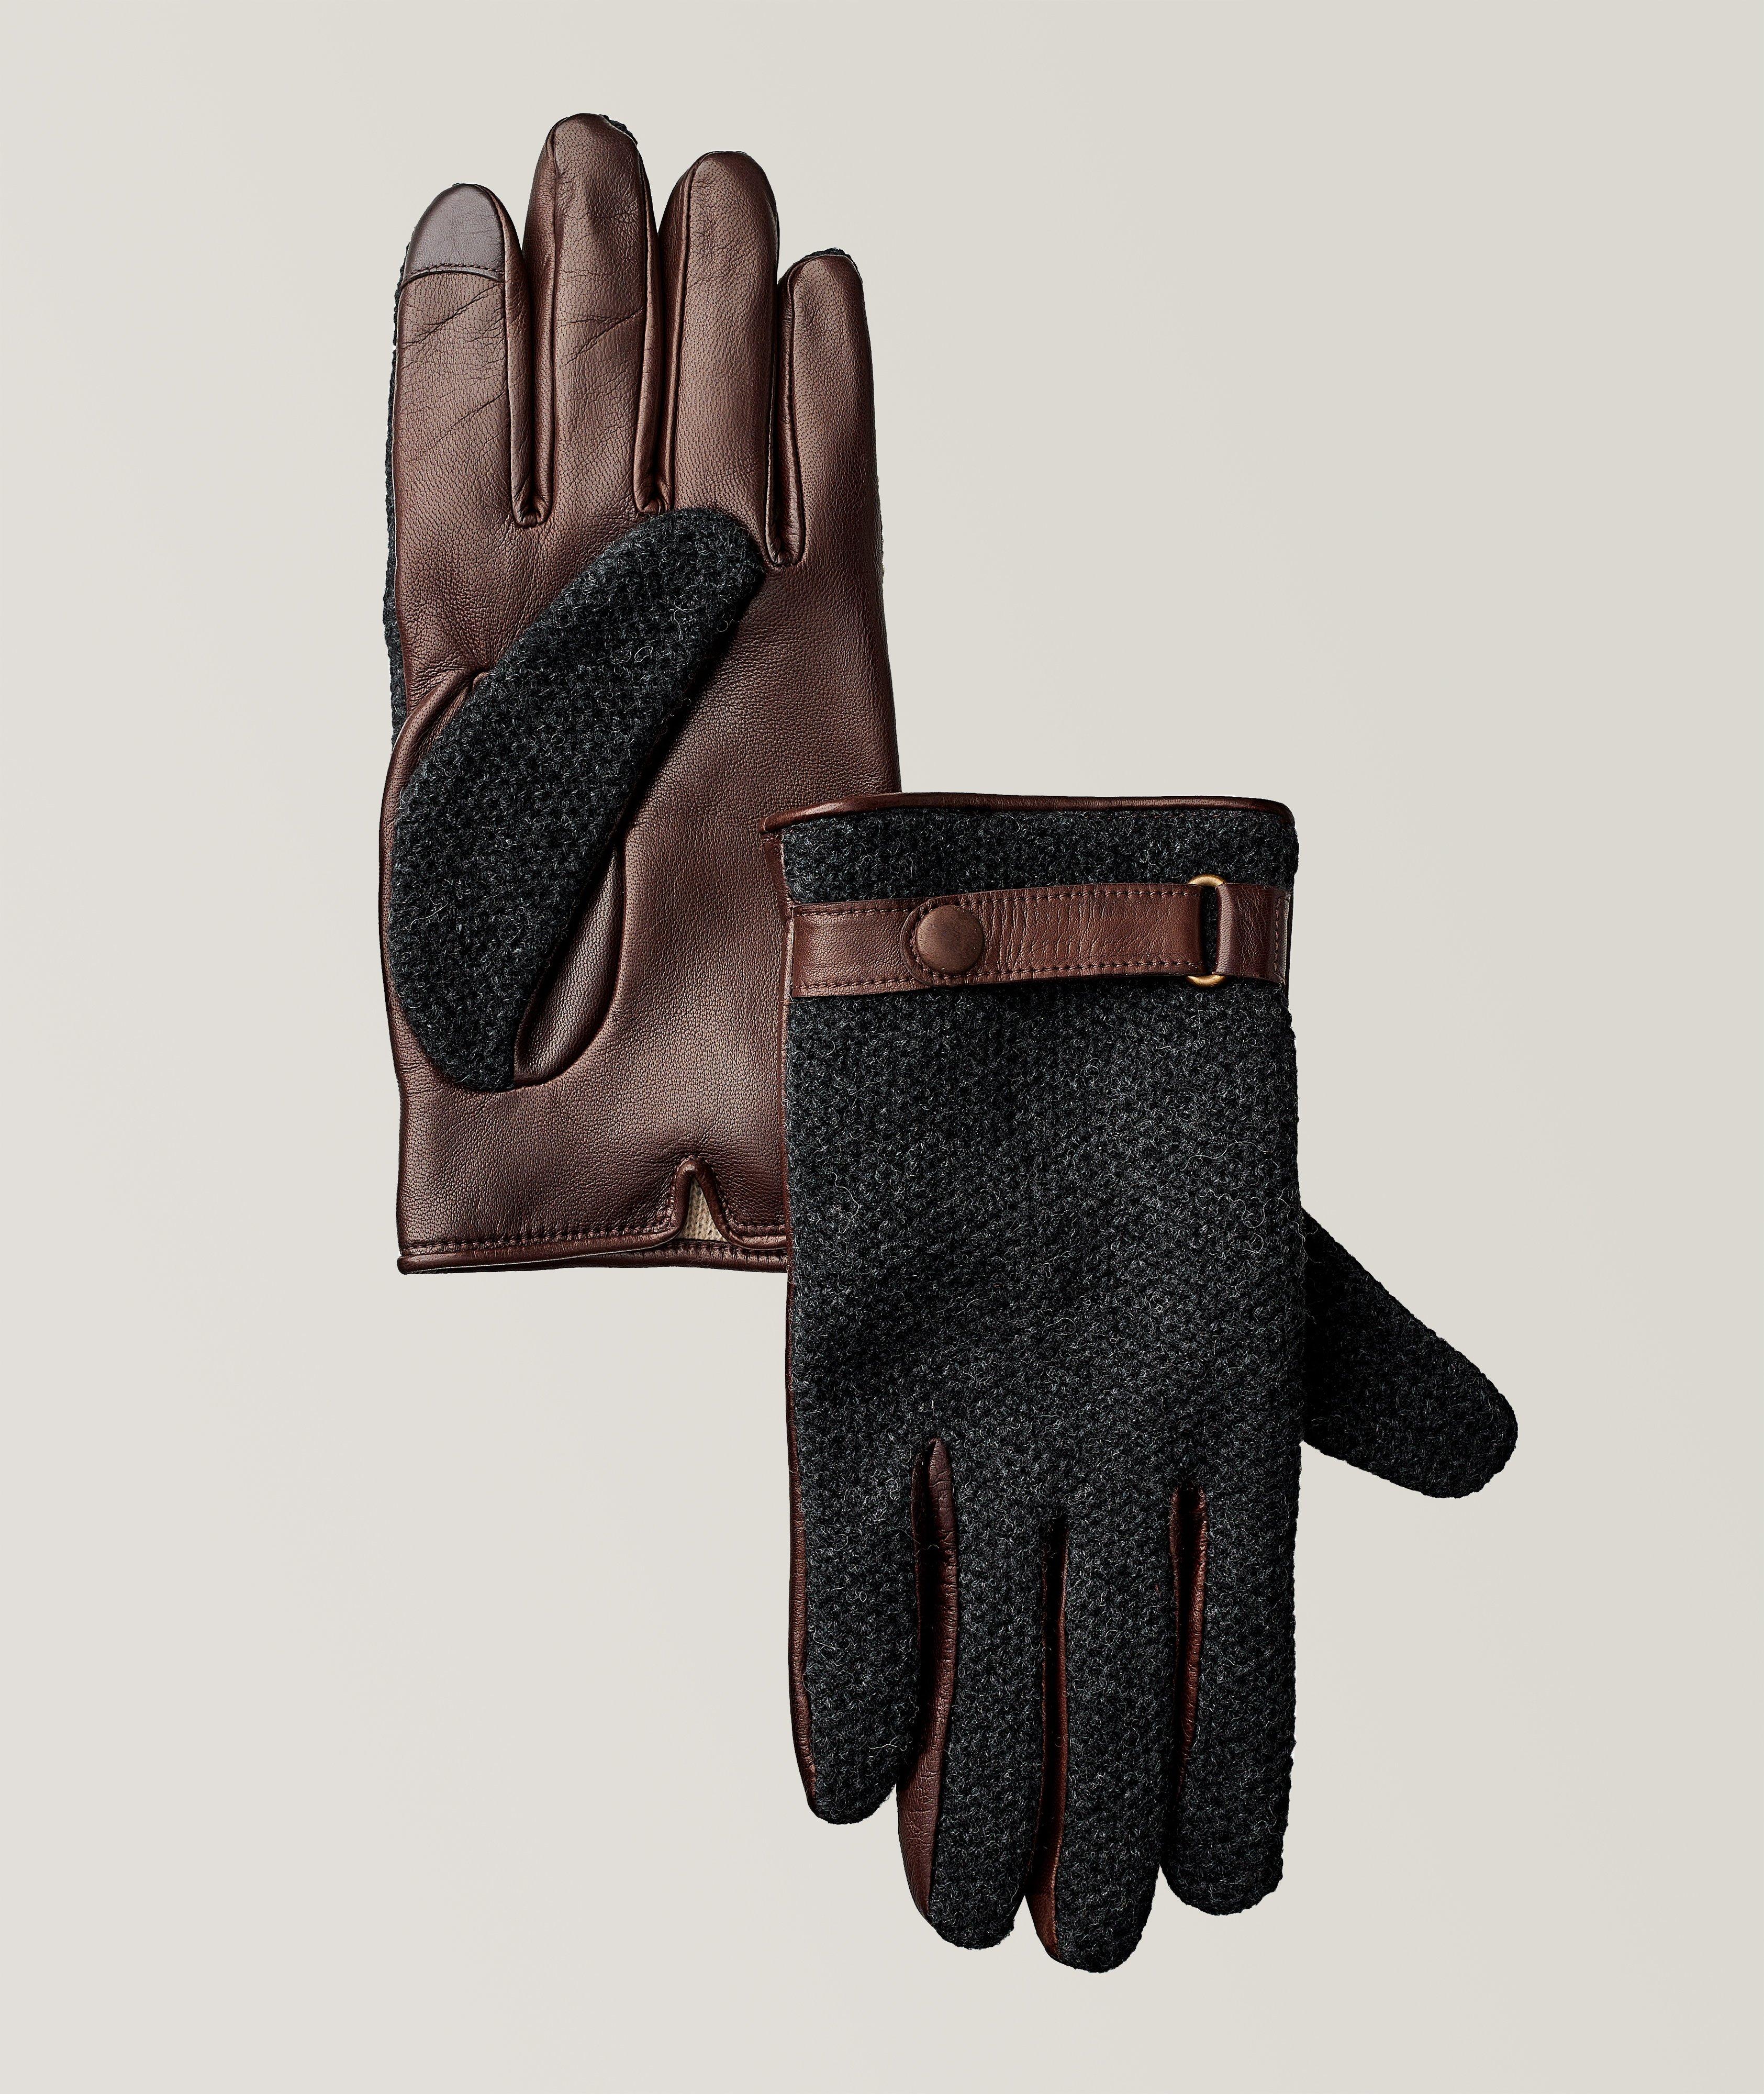 Knit Cashmere Lined Leather Snap Gloves image 0